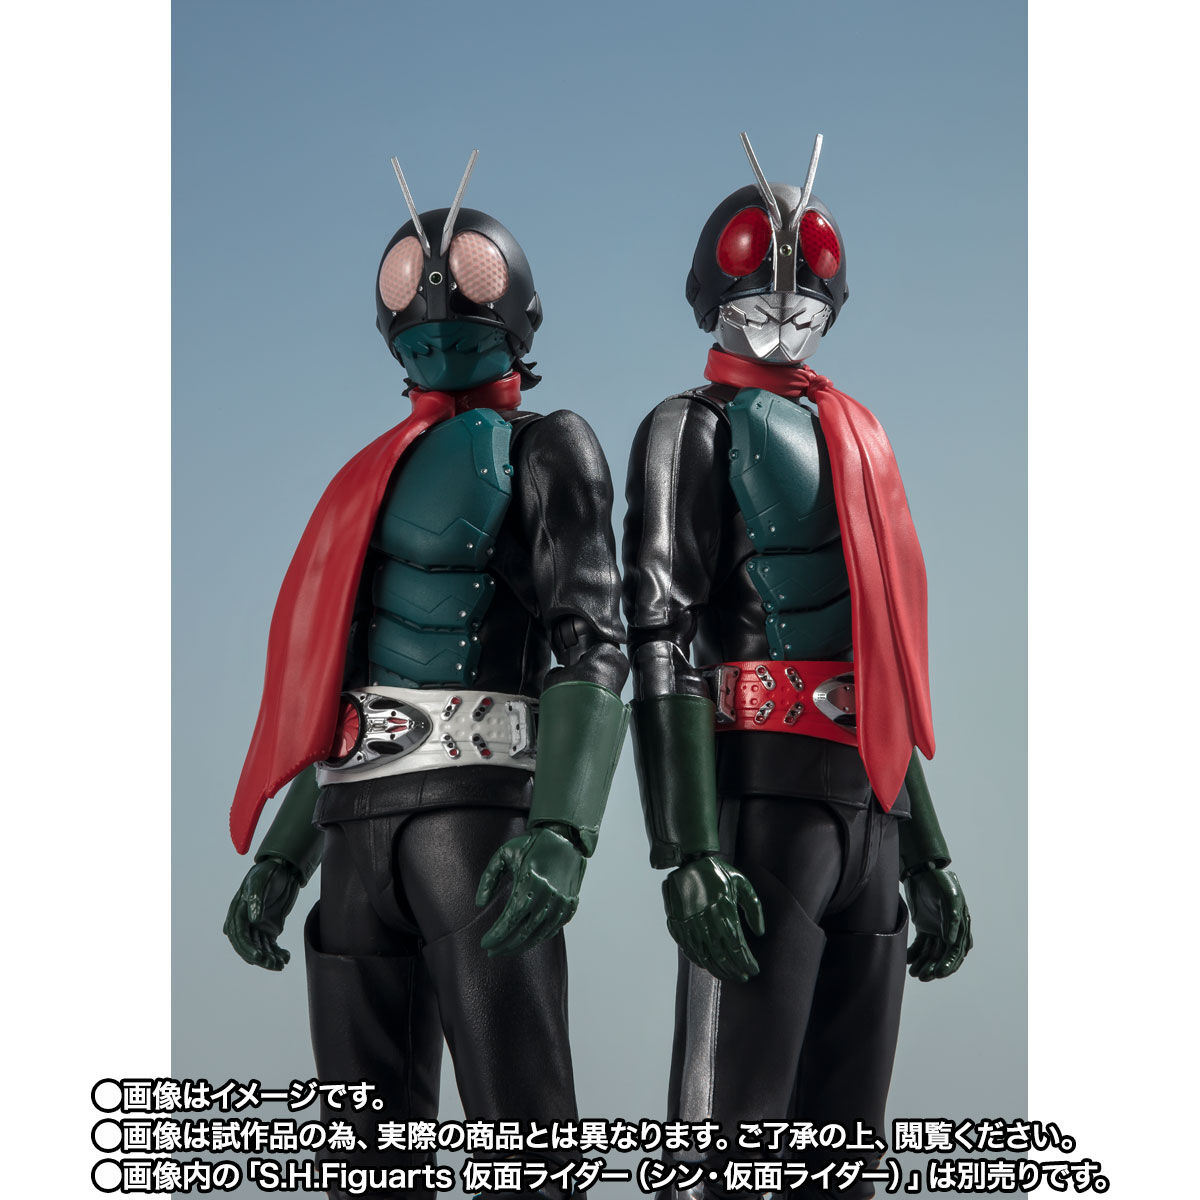 S.H.Figuarts仮面ライダー&仮面ライダー第2号（シン・仮面ライダー）